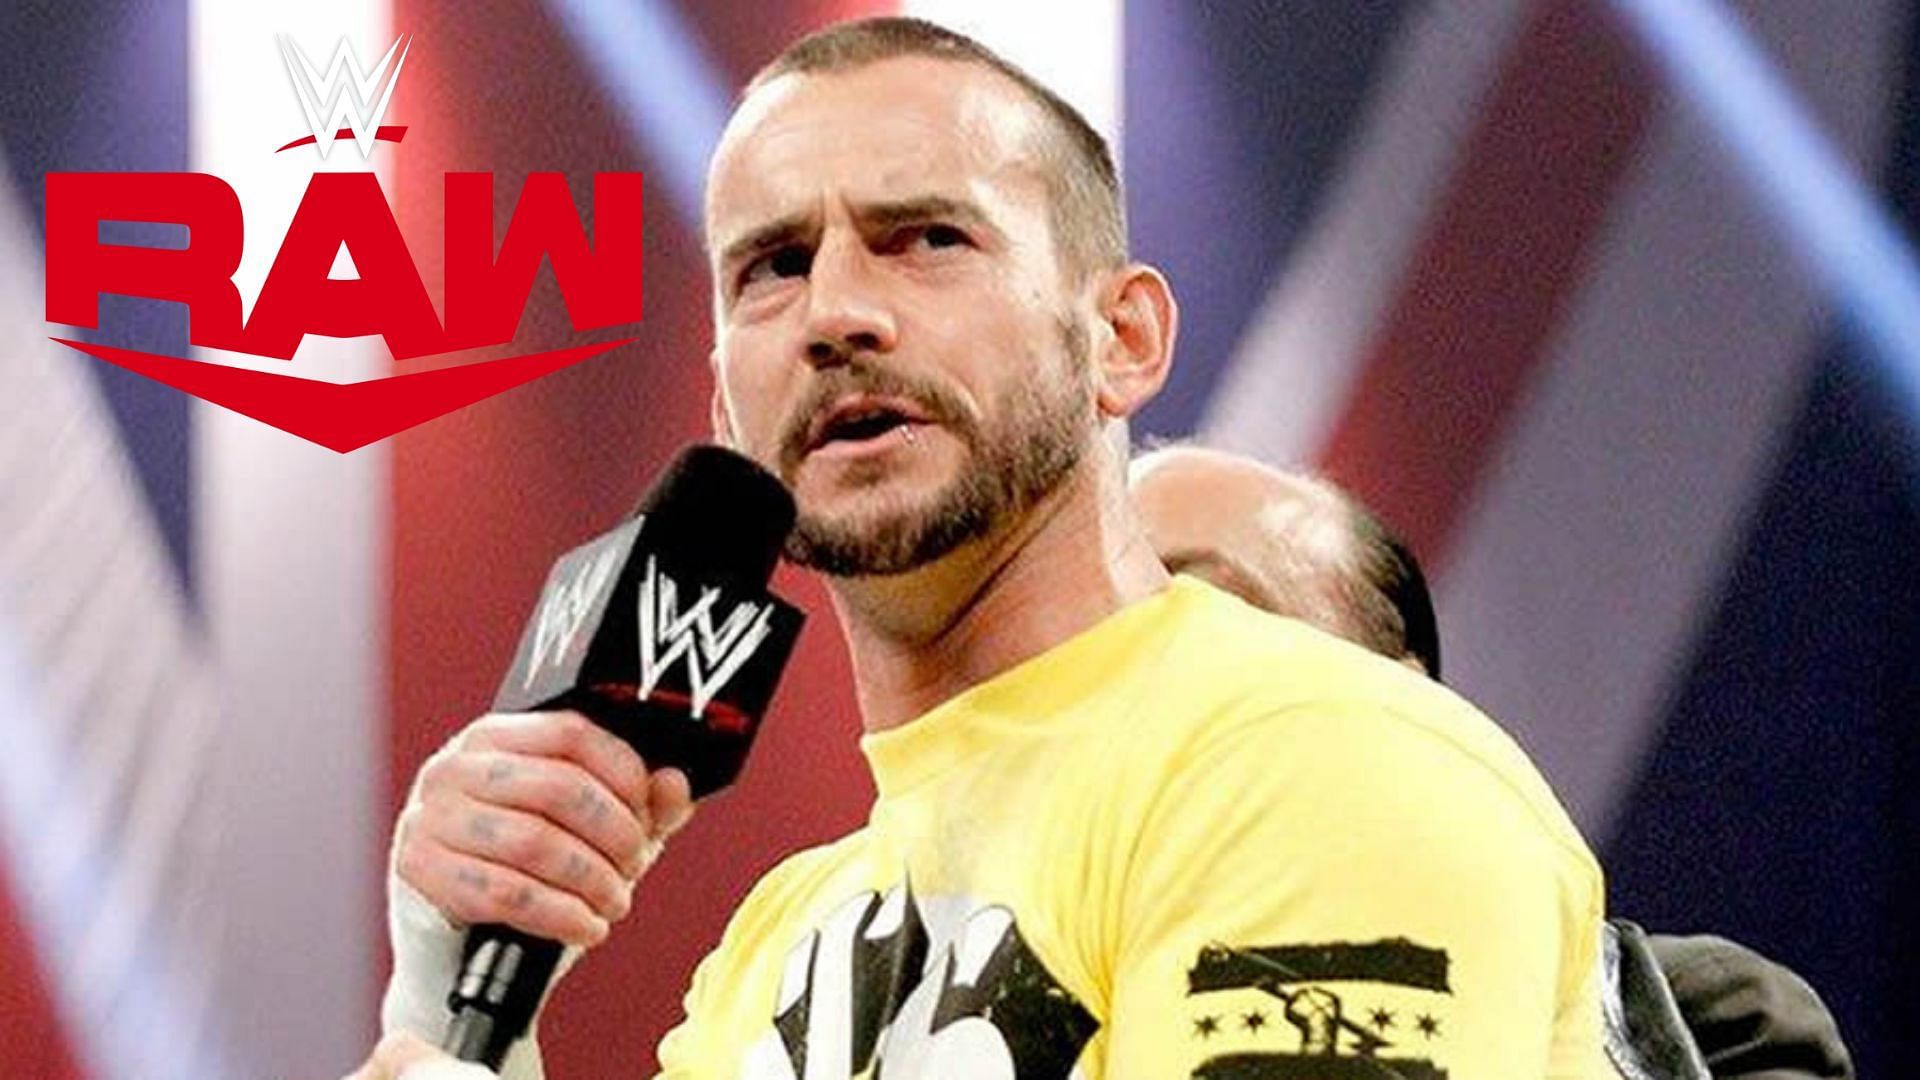 CM Punk was reported backstage at WWE RAW